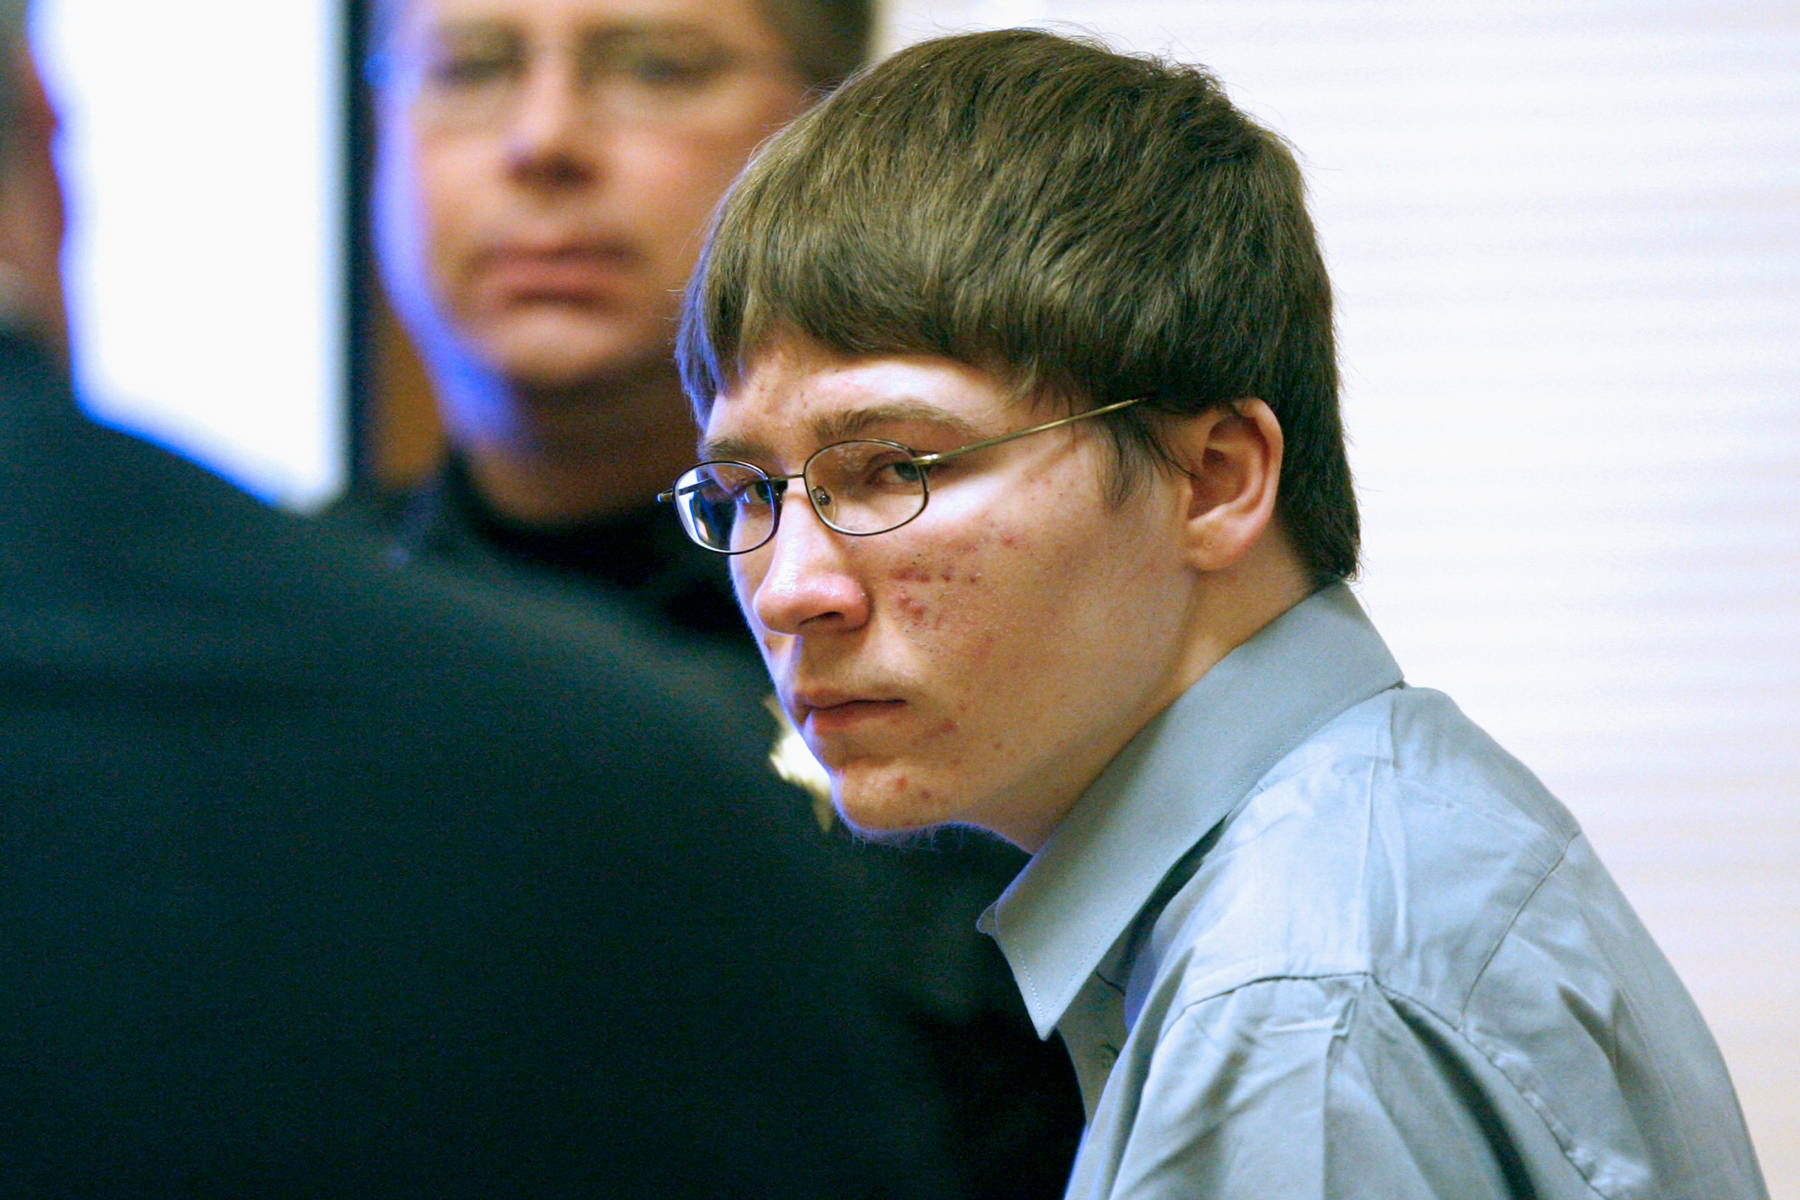 Is the World Really Going to Need a Musical titled “Making a Murderer”?